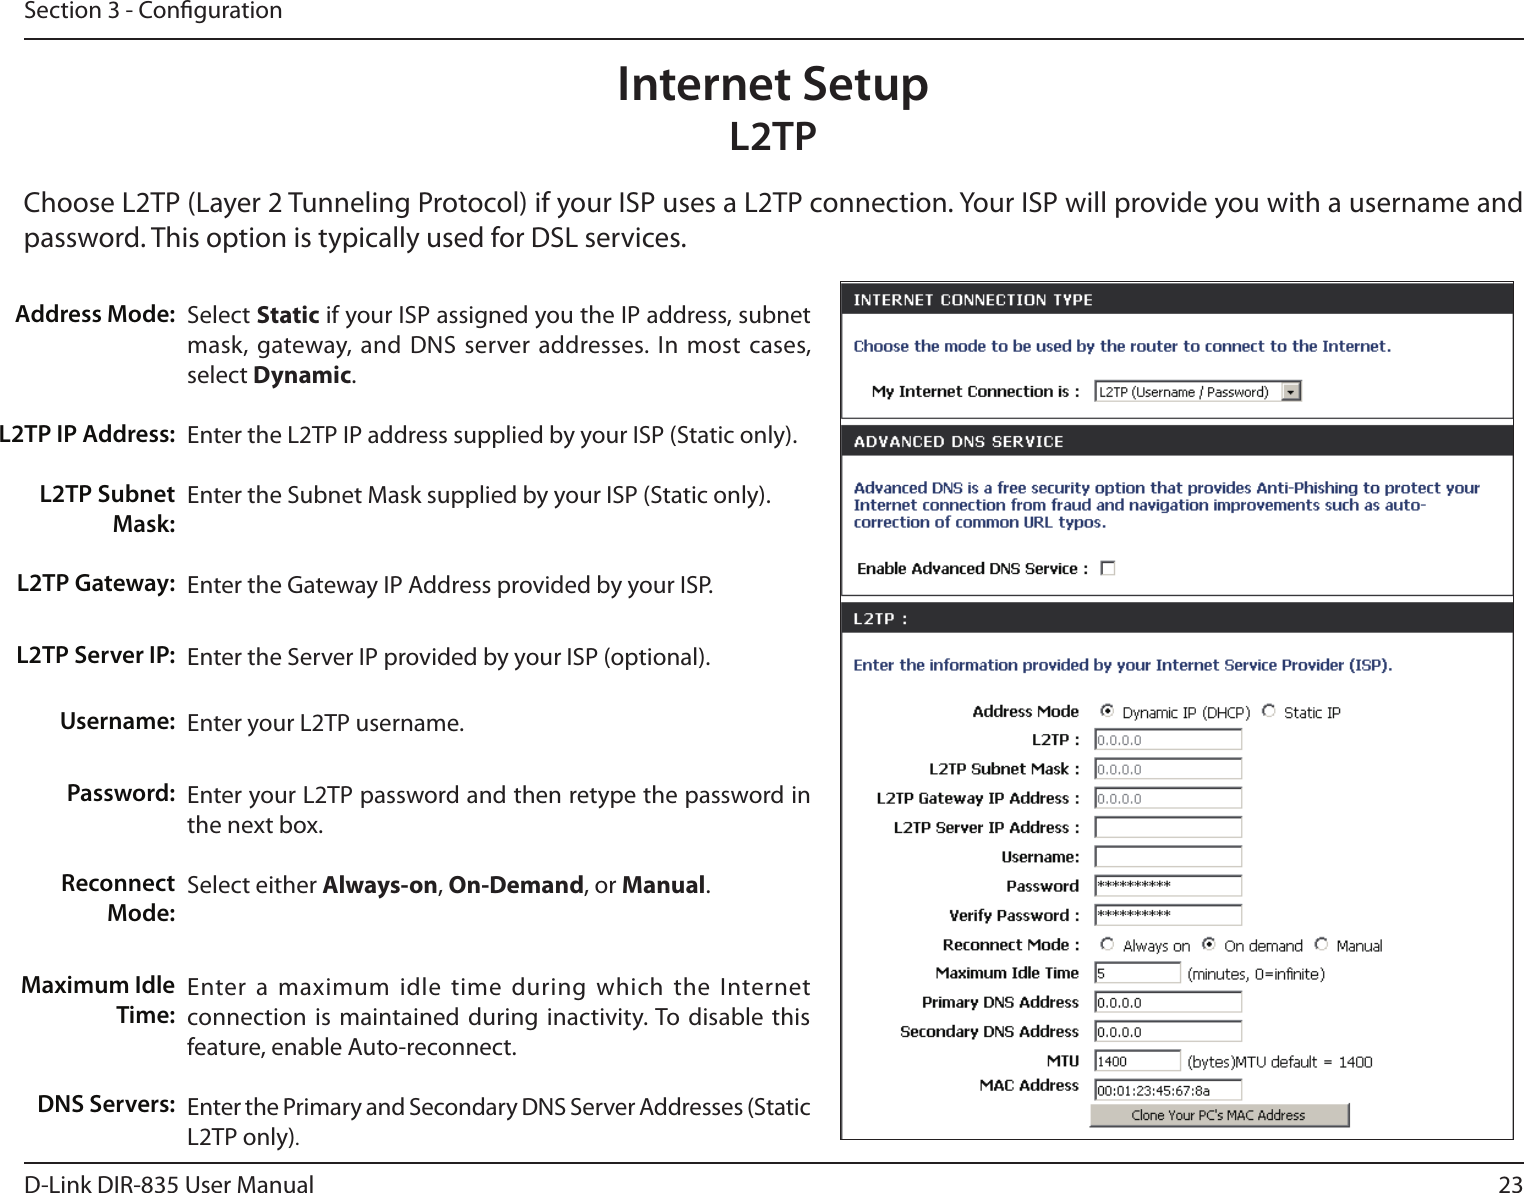 23D-Link DIR-835 User ManualSection 3 - CongurationSelect Static if your ISP assigned you the IP address, subnet mask,  gateway, and DNS server addresses. In  most cases, select Dynamic.Enter the L2TP IP address supplied by your ISP (Static only).Enter the Subnet Mask supplied by your ISP (Static only).Enter the Gateway IP Address provided by your ISP.Enter the Server IP provided by your ISP (optional).Enter your L2TP username.Enter your L2TP password and then retype the password in the next box.Select either Always-on, On-Demand, or Manual.Enter a maximum  idle time during  which the Internet connection is  maintained during inactivity. To  disable this feature, enable Auto-reconnect.Enter the Primary and Secondary DNS Server Addresses (Static L2TP only).Address Mode:L2TP IP Address:L2TP Subnet Mask:L2TP Gateway:L2TP Server IP:Username:Password:Reconnect Mode:Maximum Idle Time: DNS Servers:Internet SetupL2TPChoose L2TP (Layer 2 Tunneling Protocol) if your ISP uses a L2TP connection. Your ISP will provide you with a username and password. This option is typically used for DSL services. 